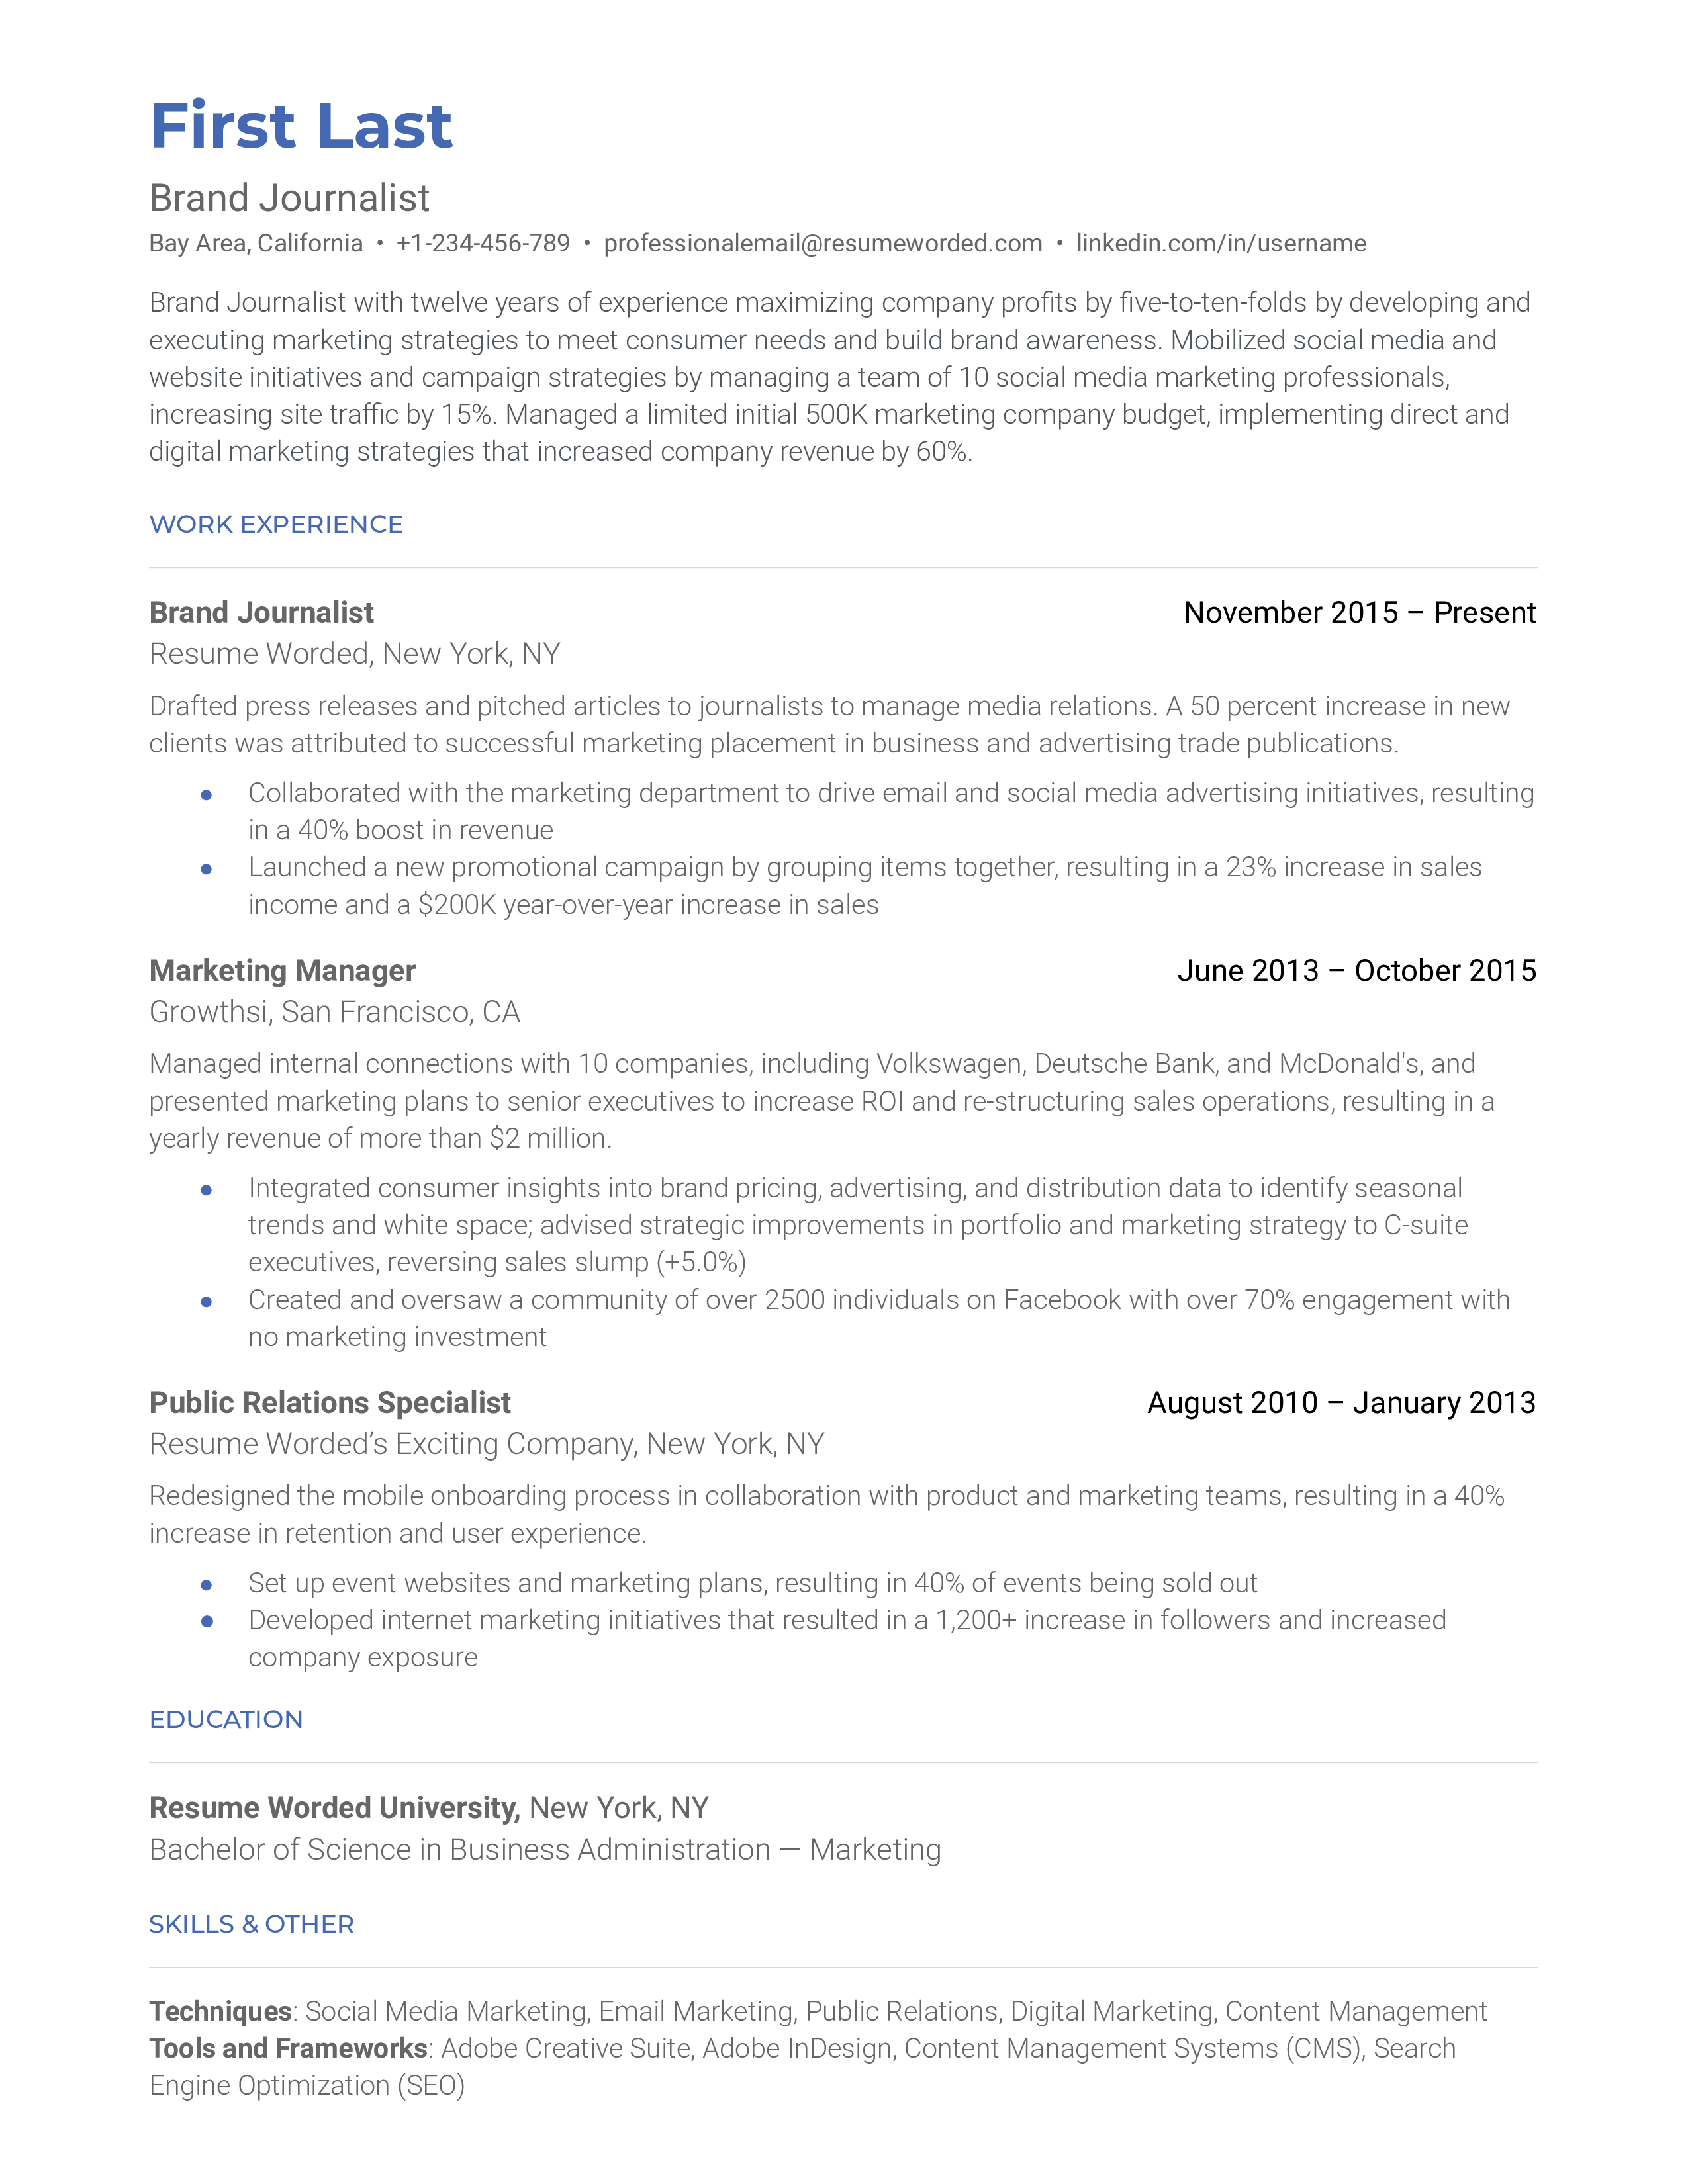 A brand journalist resume sample that highlights the applicant’s strong marketing background and impressive experience.